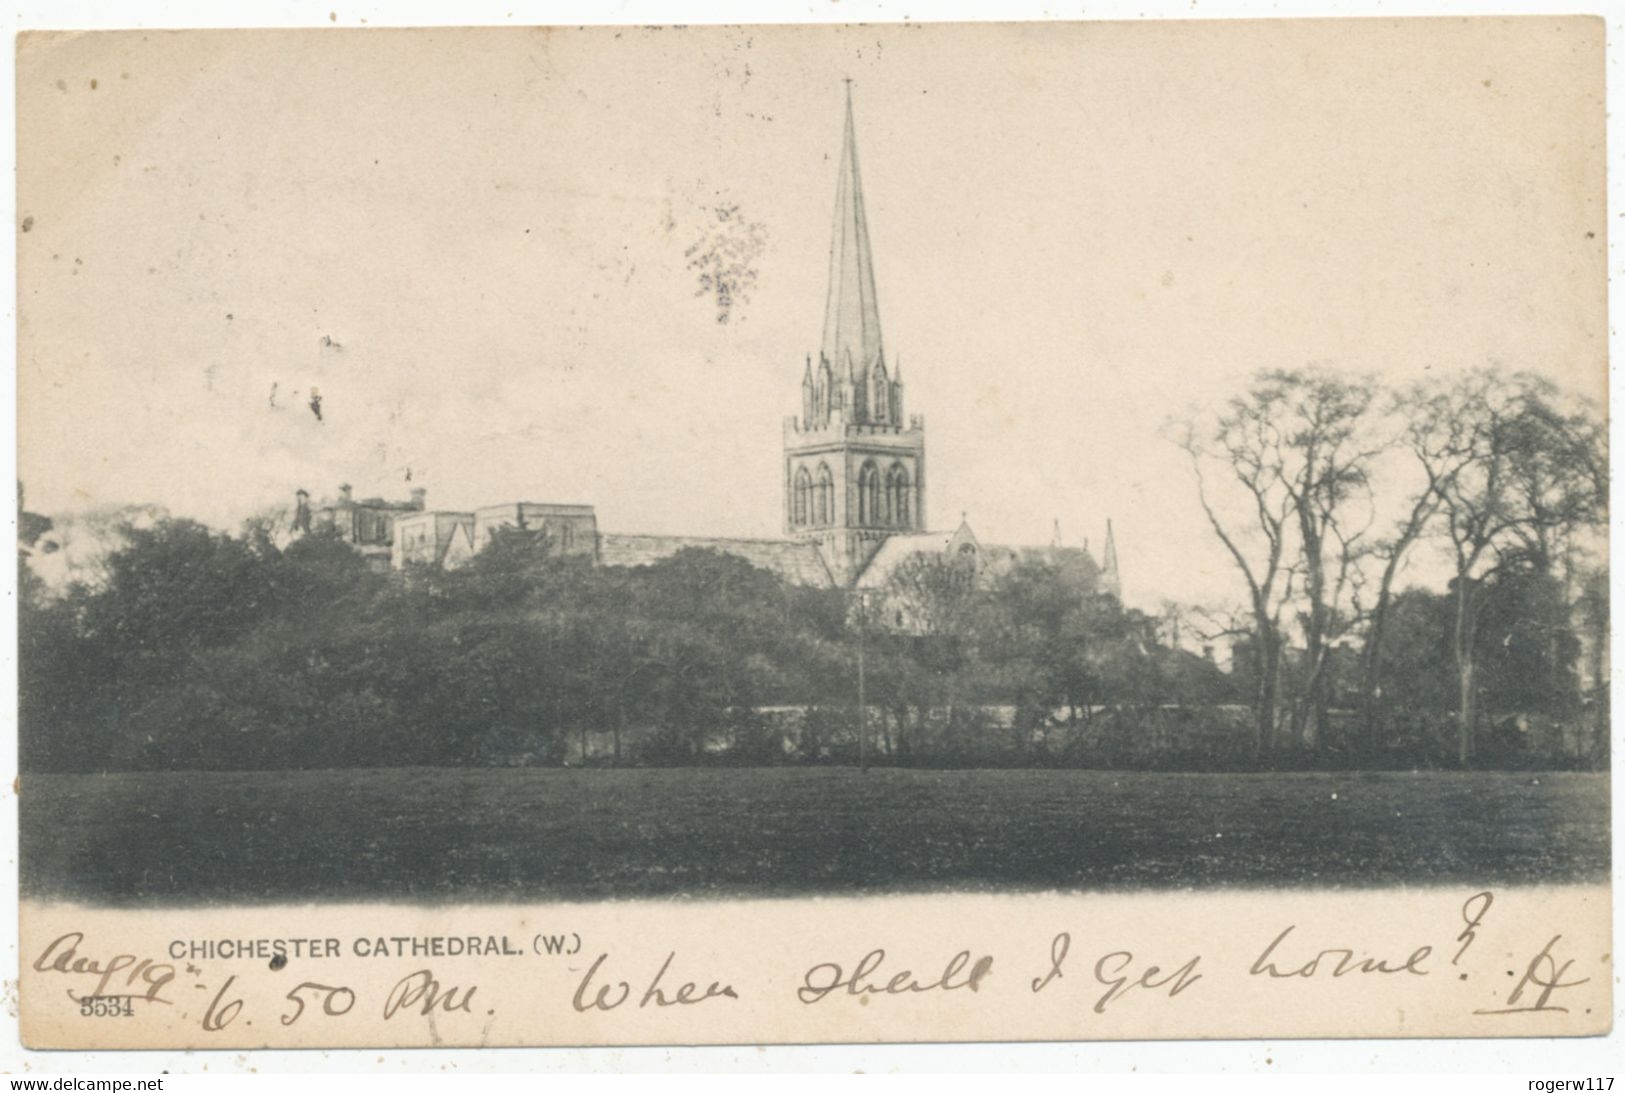 Chichester Cathedral (W.), 1902 Postcard - Chichester